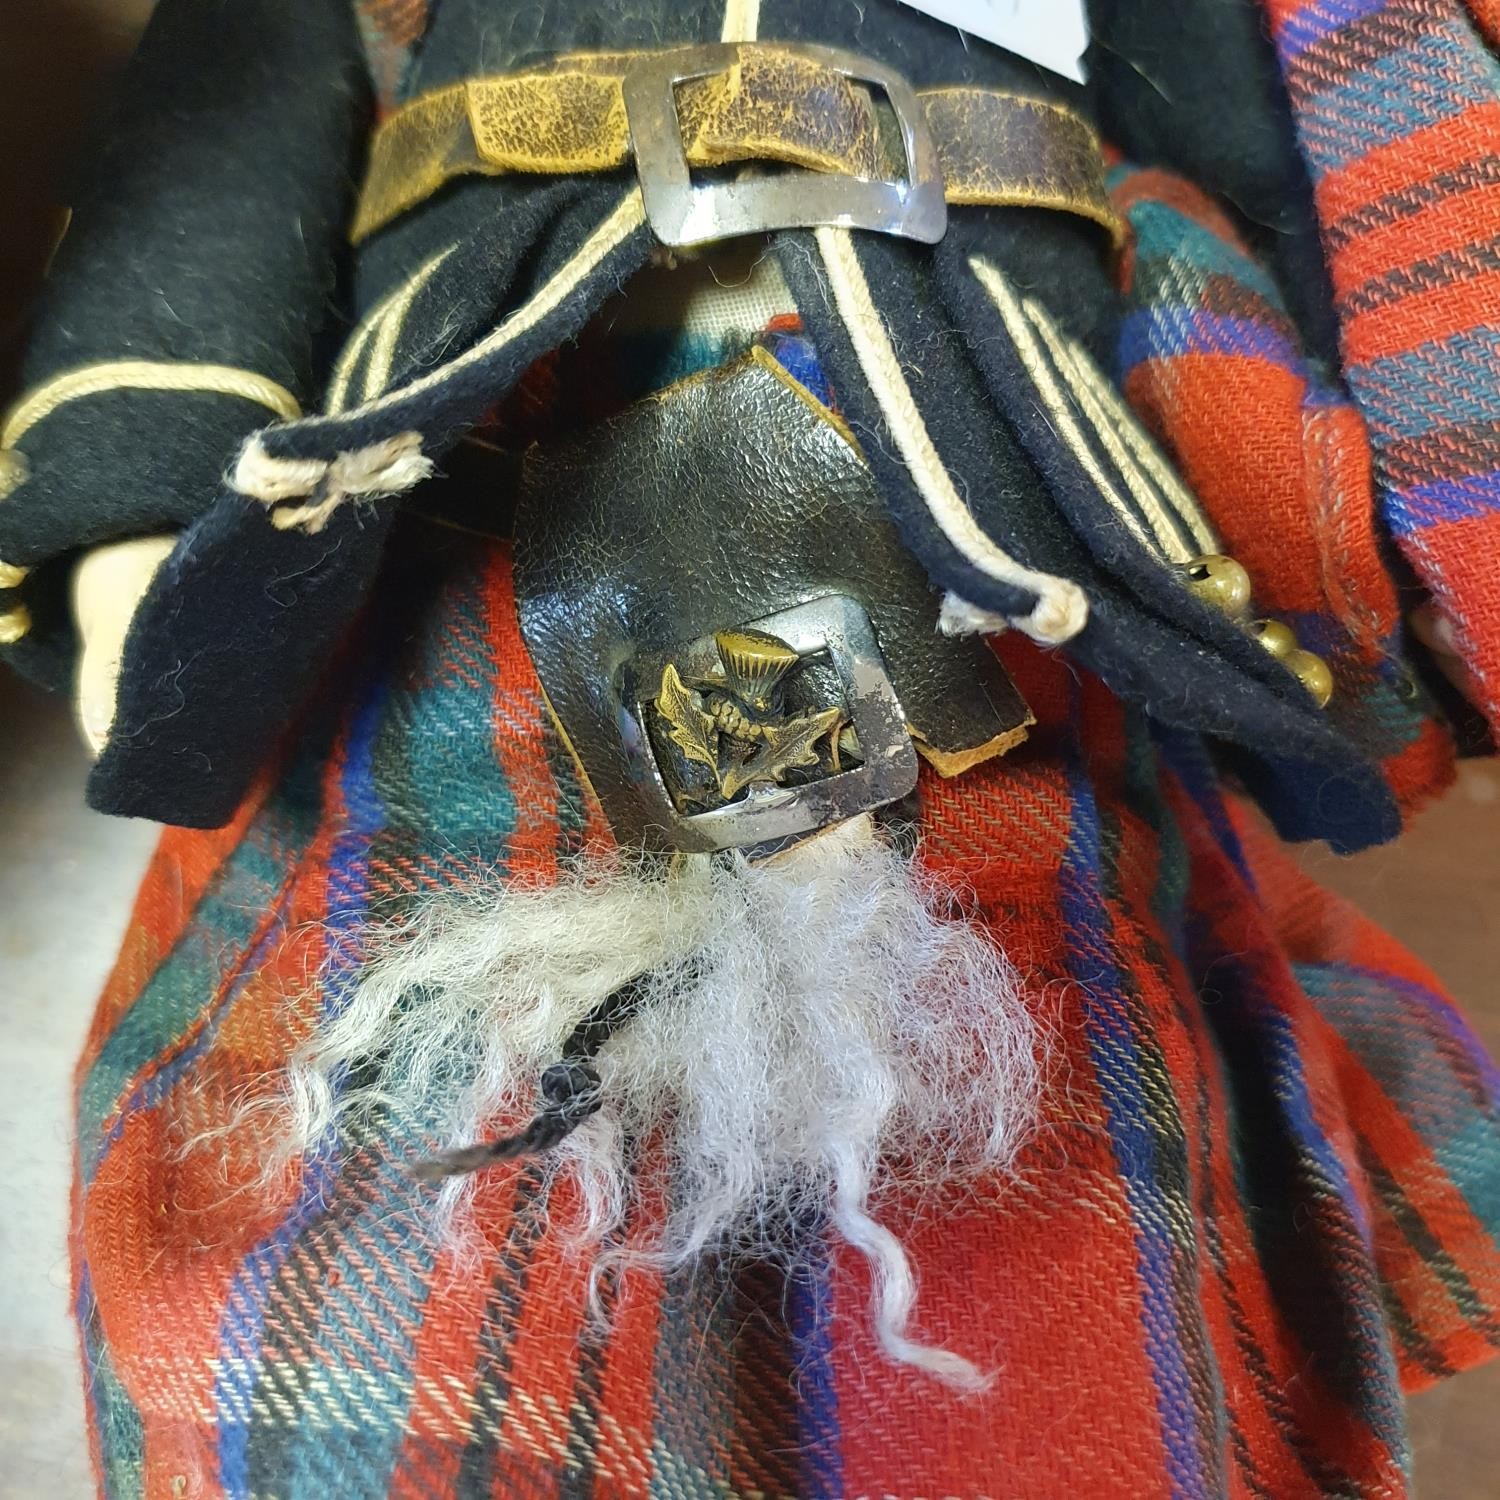 An Armand Marseille German bisque headed Scottish Boy doll, No 390, with a jointed composite body, - Image 7 of 7